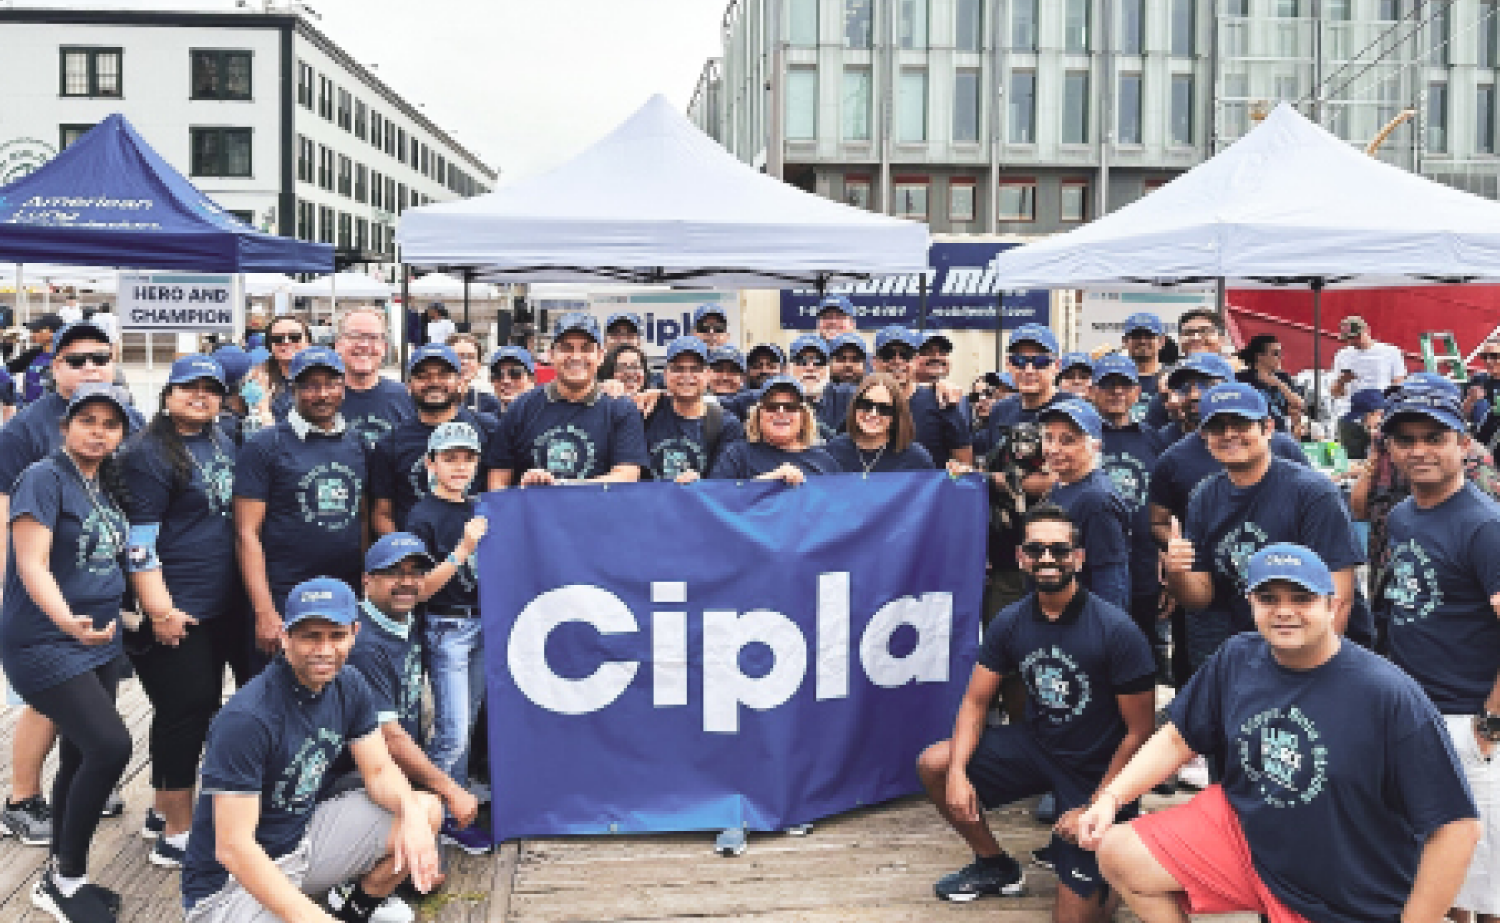 Cipla US teams walking and fundraising at the Lung force walk at NYC in partnership with the American Lung Association